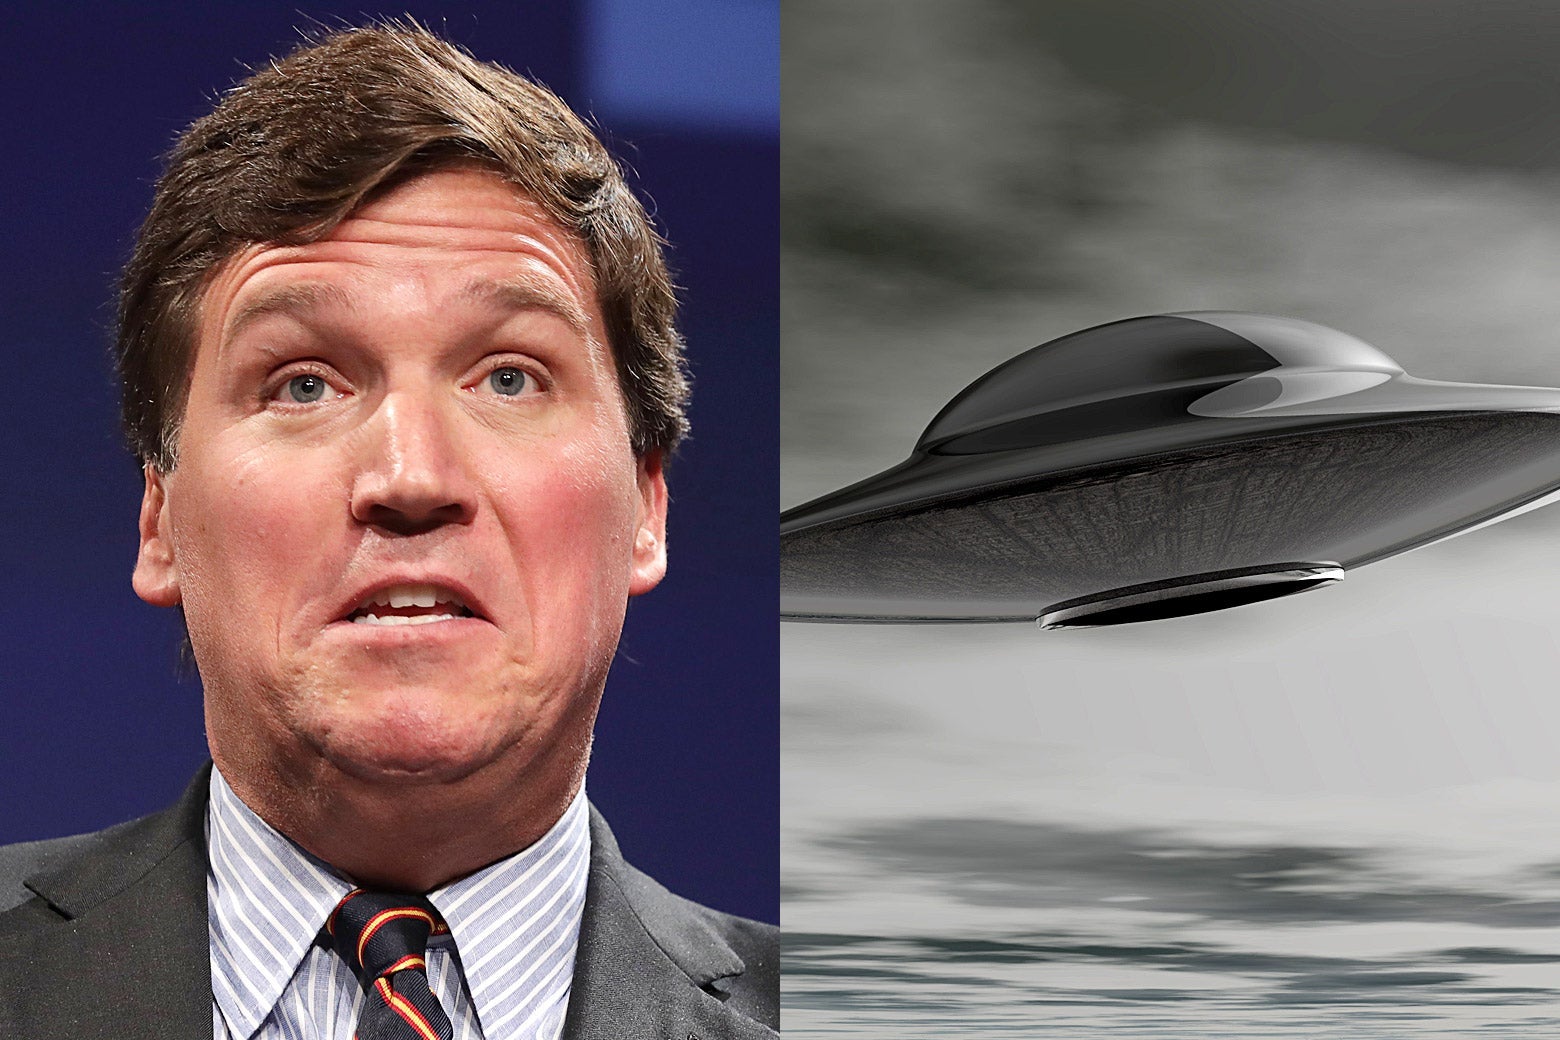 Tucker Carlson and a flying saucer.